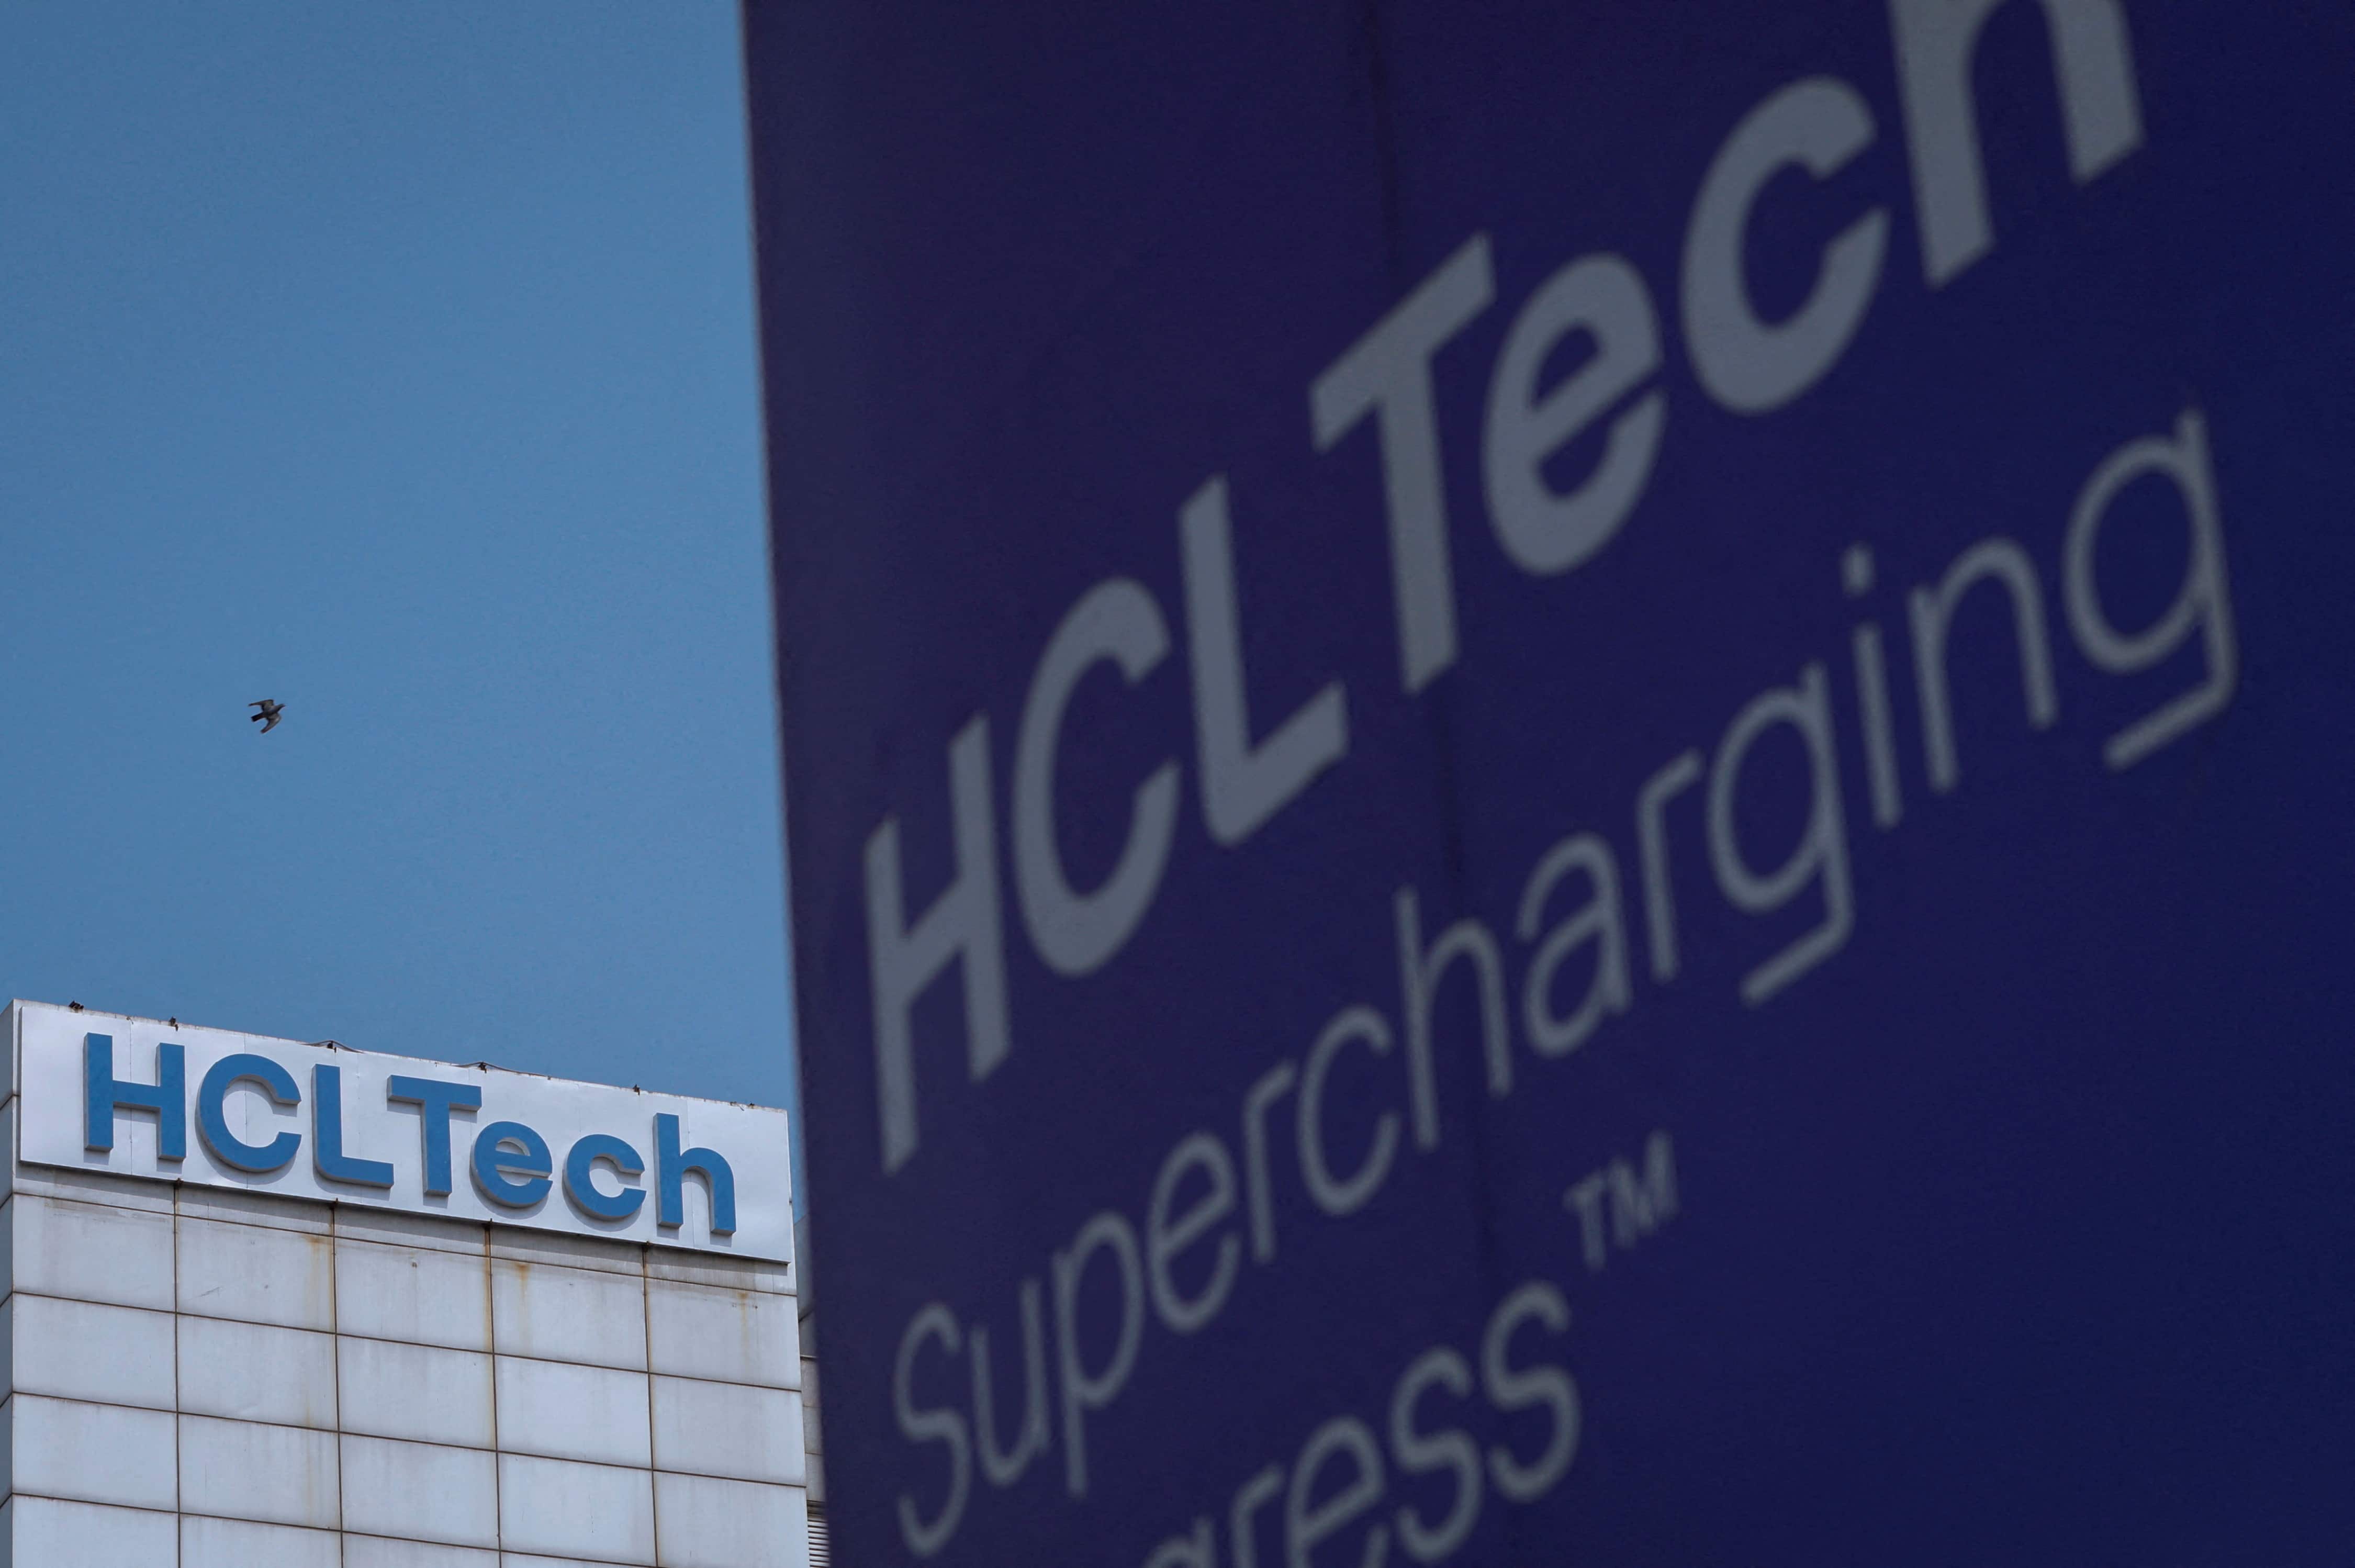 HCL Tech, Cisco launch ‘Pervasive Wireless Mobility as-a-Service’ for secured connectivity across enterprises